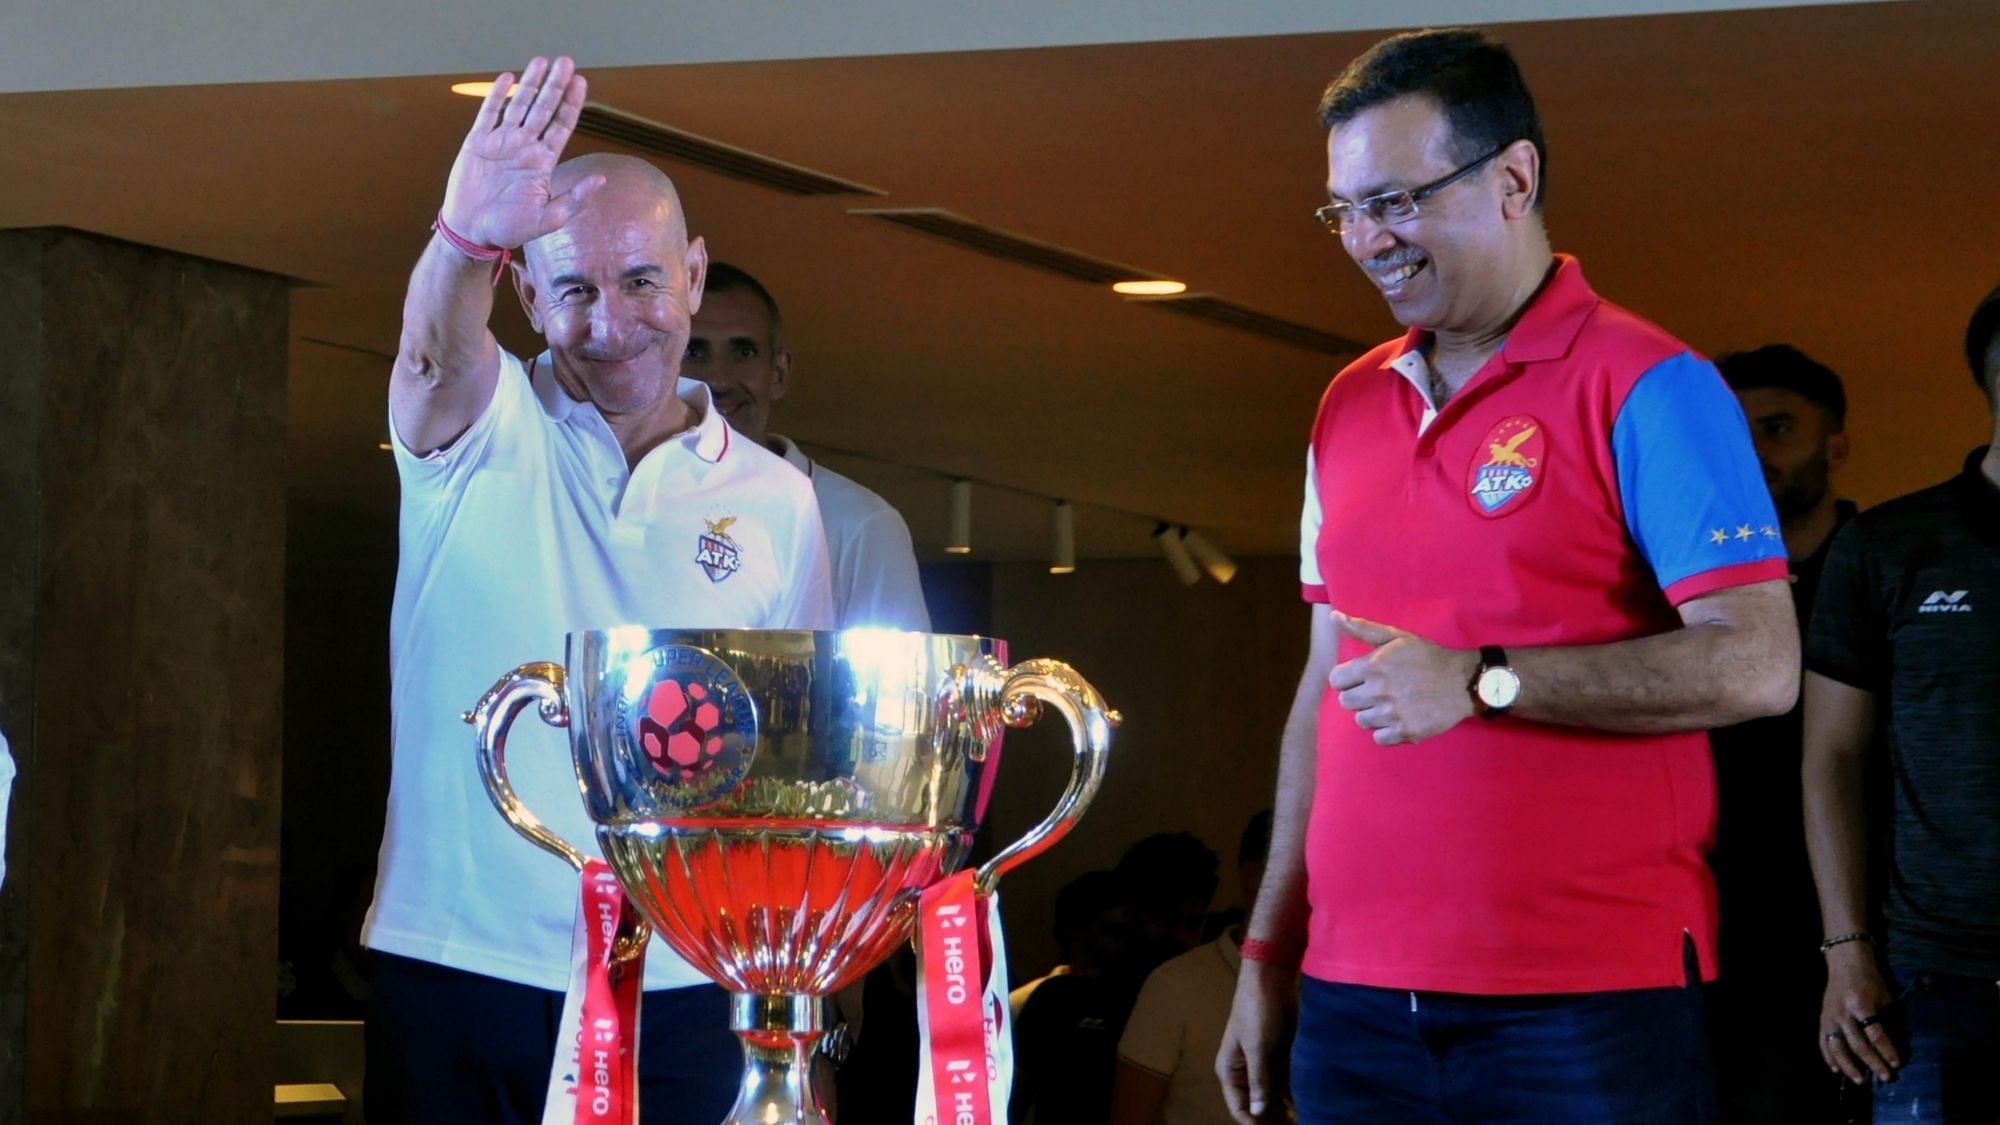 The Antonio Habas-coached ATK defeated Chennaiyin FC 3-1 in the summit clash in Goa to become the most successful franchise of ISL.